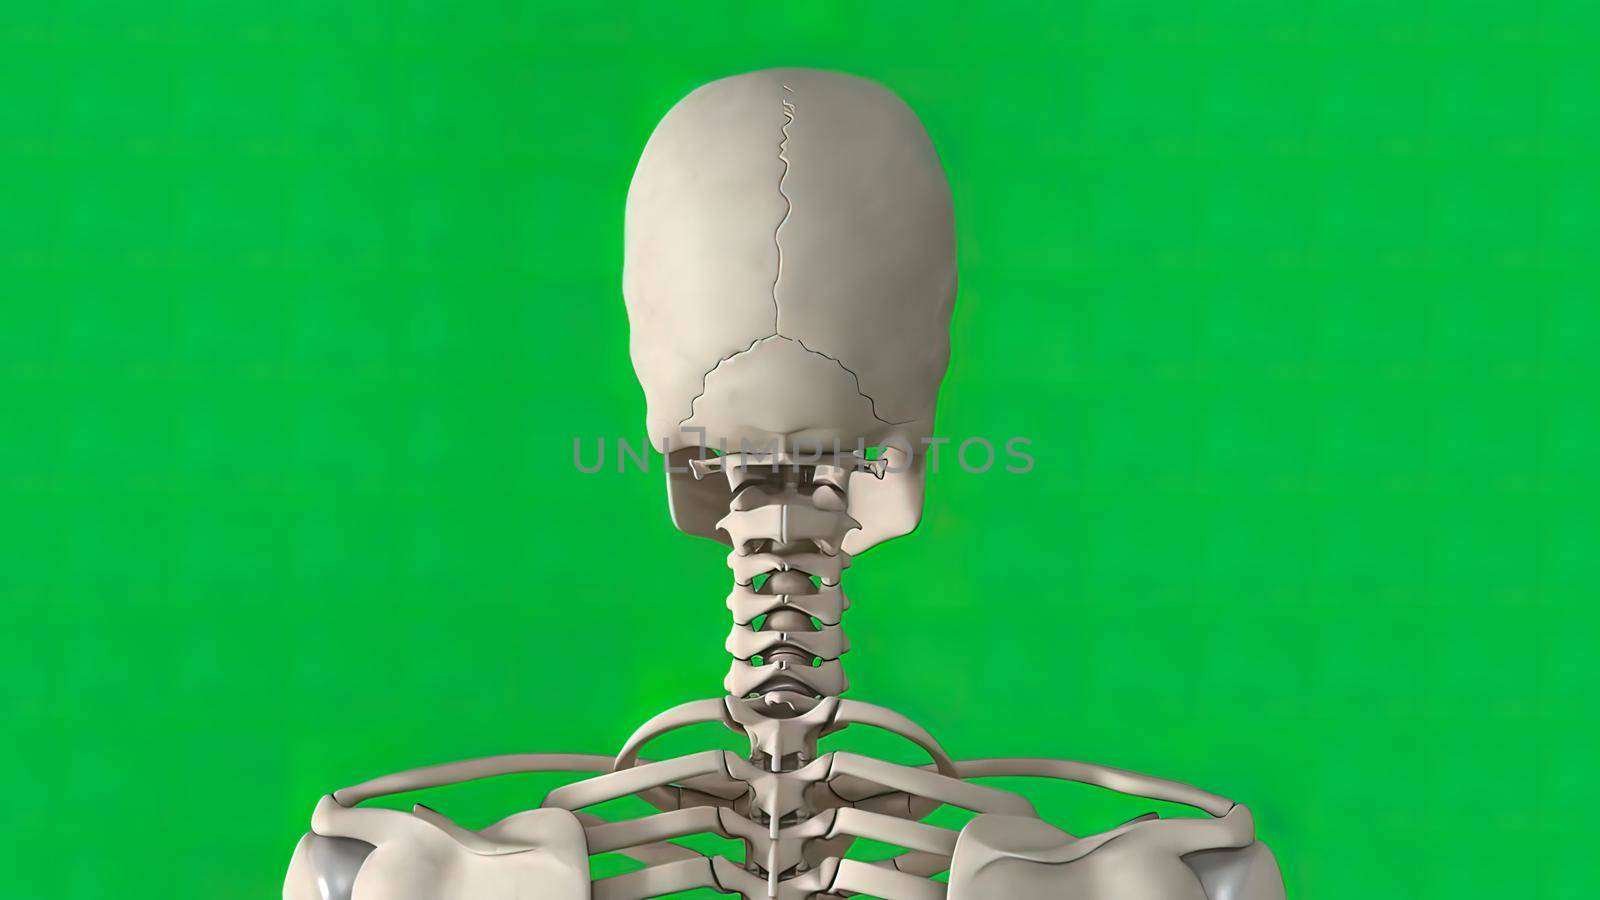 The skull is a bone structure that forms the head in vertebrates. 3D illustration